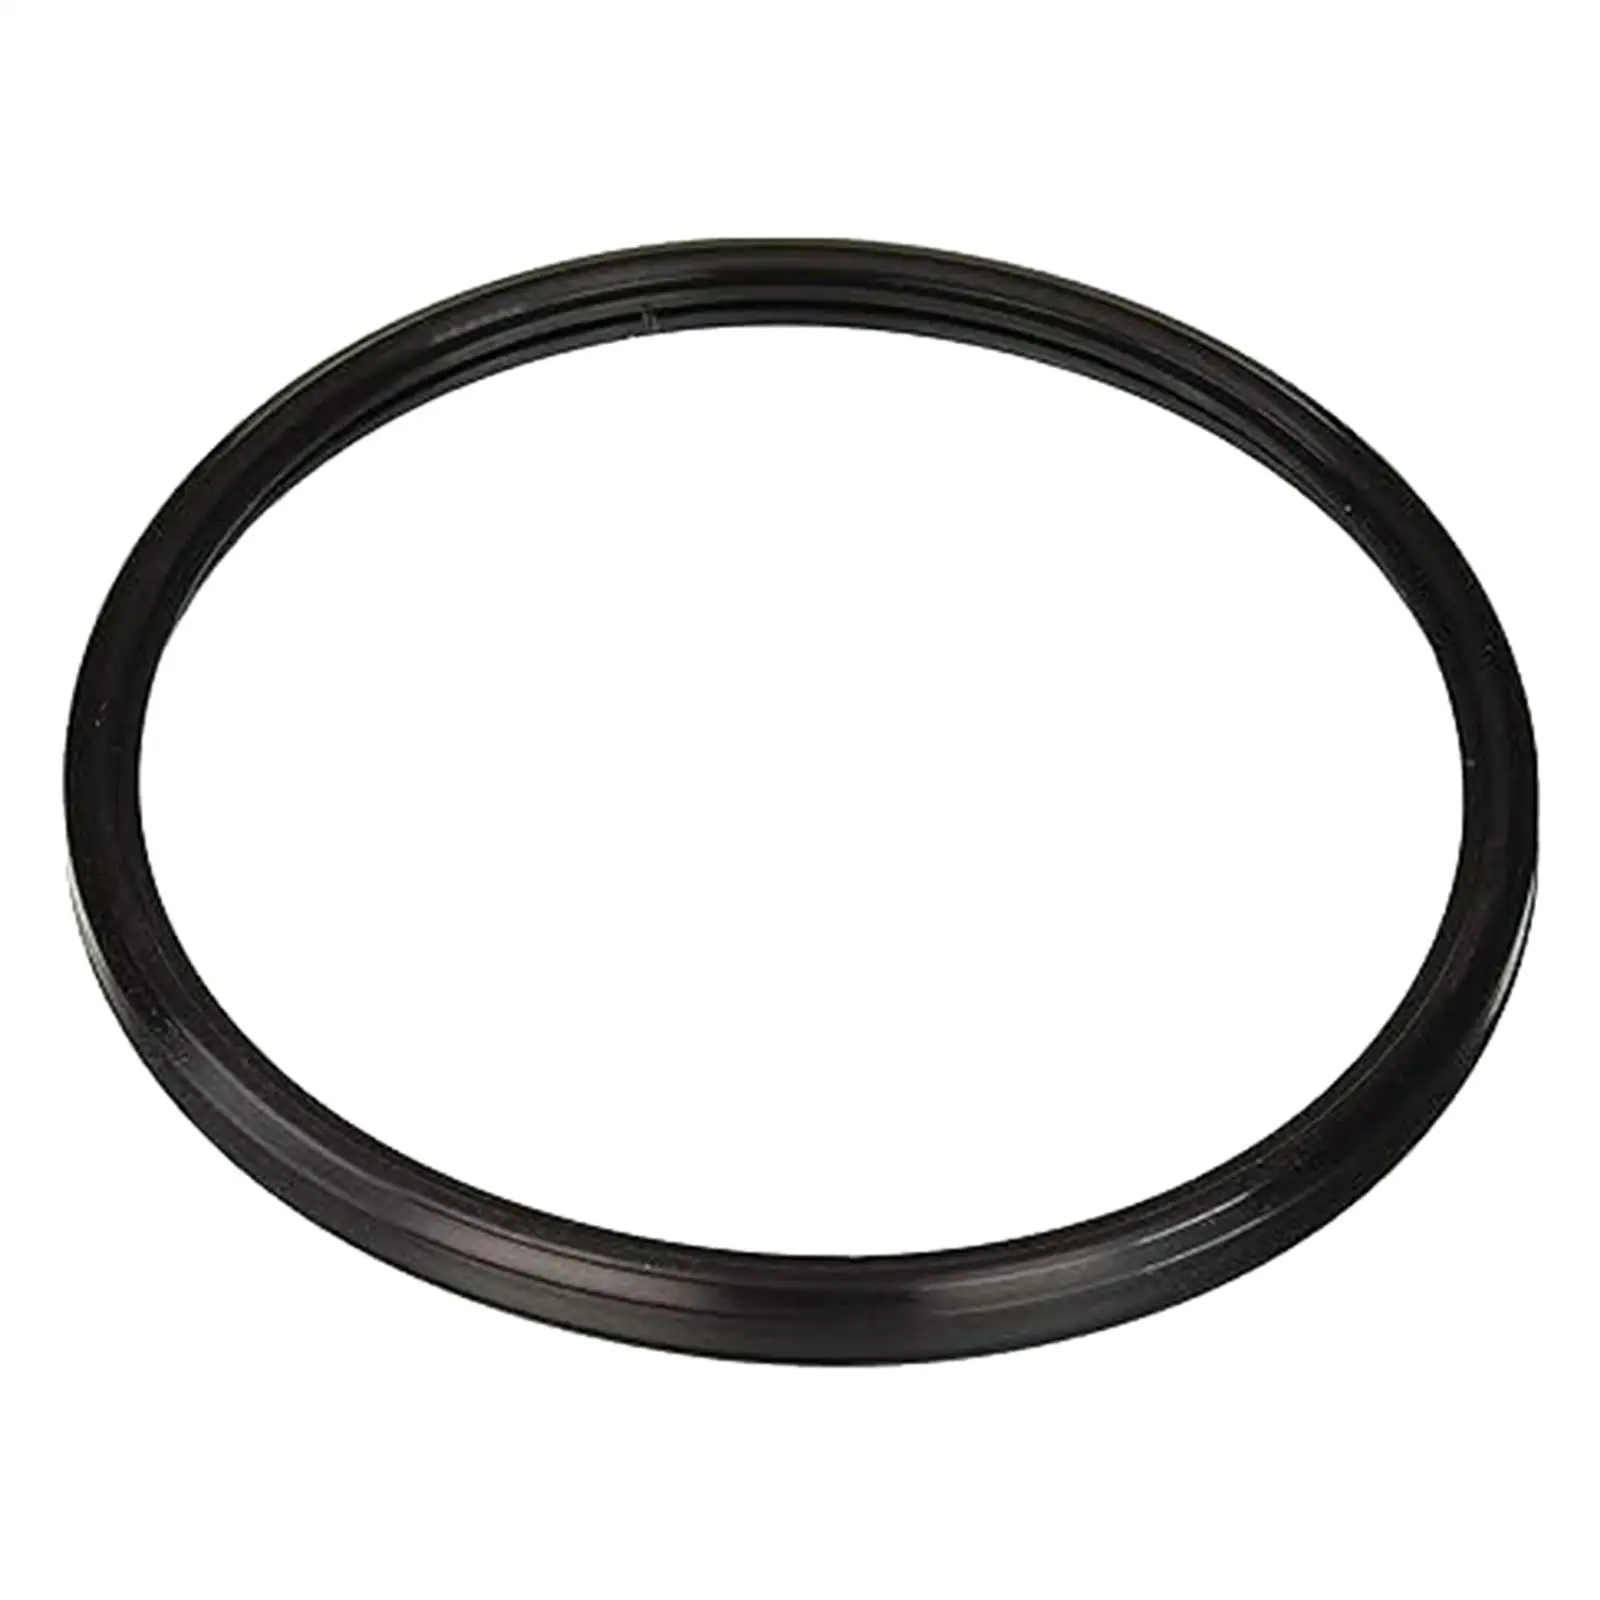 Lens Gasket Black Underwater Lights Accessory Rubber Washer for Spx0540Z2 Spx0580Z2 Easy Installation Repair Parts Professional